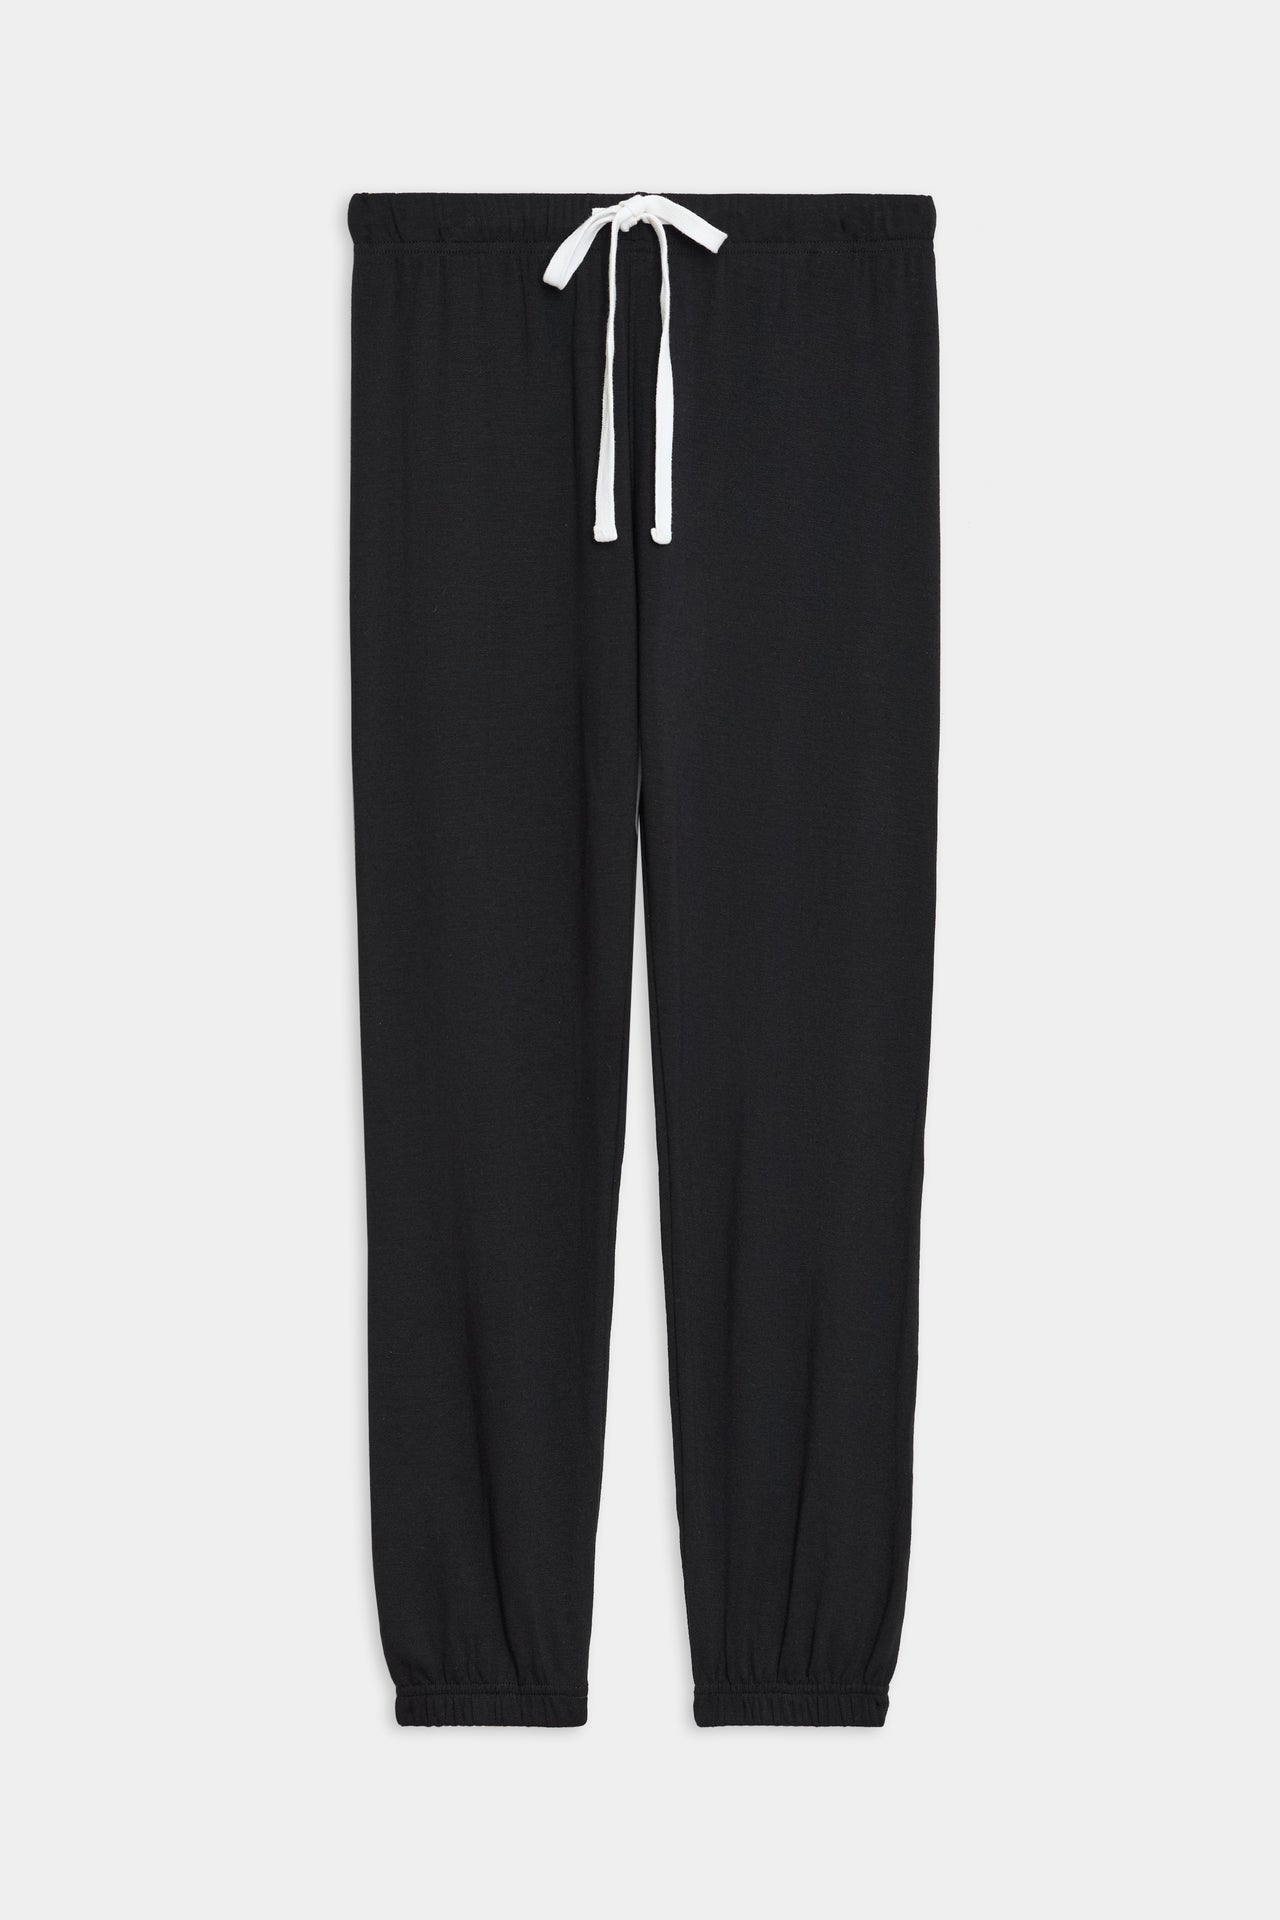 Front flat view of black sweatpant jogger with white drawstring